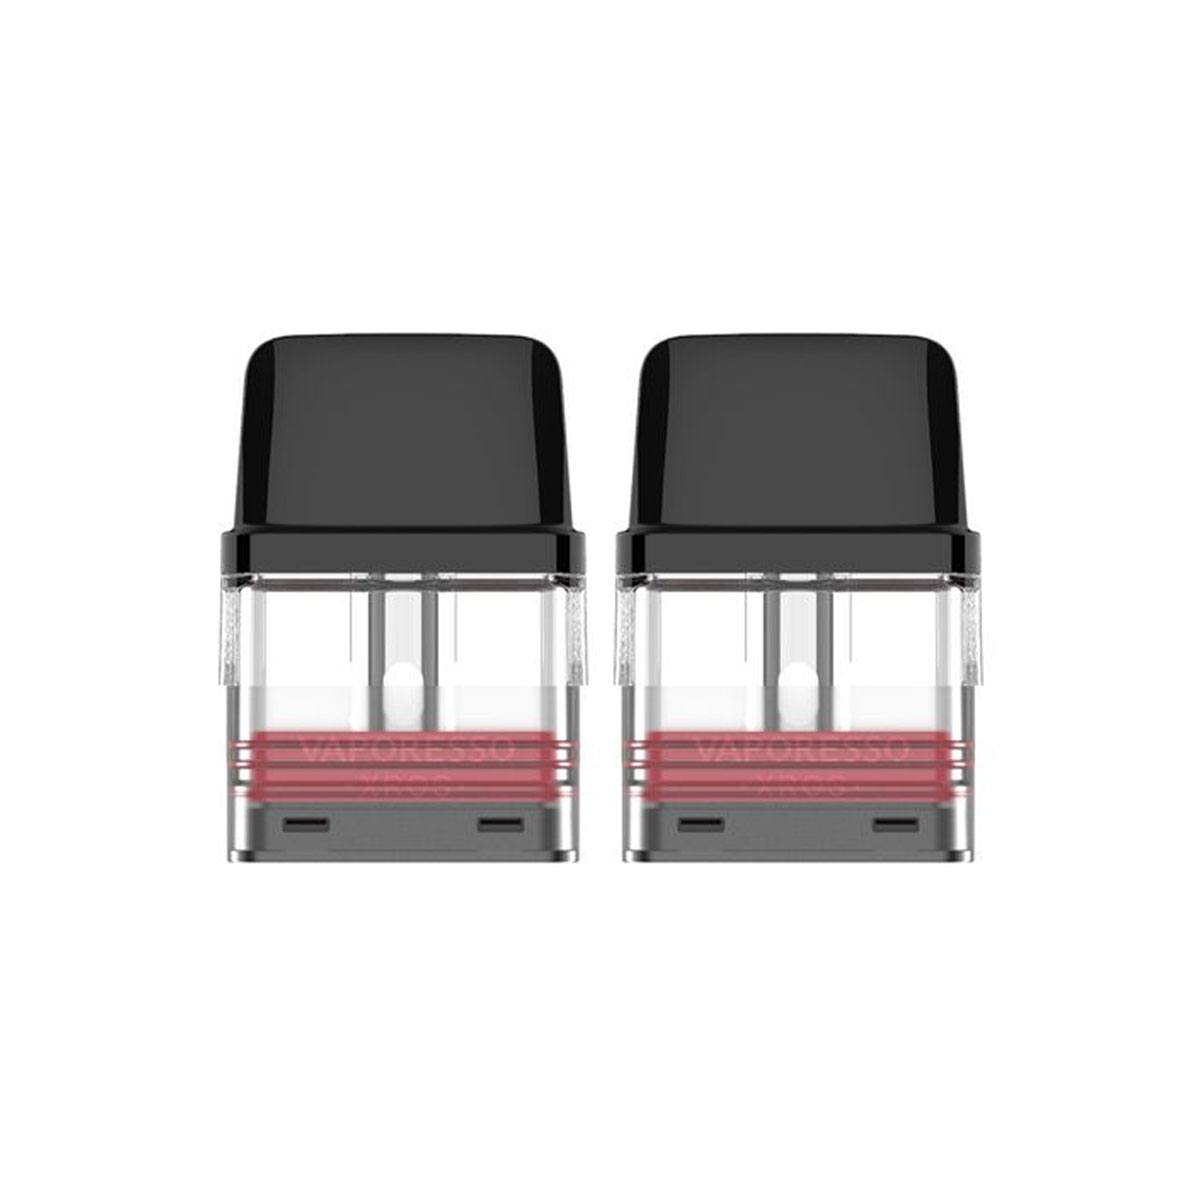 Vaporesso - XROS Series Replacement Pod (2 Pack) Replacement Pod Vaporesso 0.8 ohm 